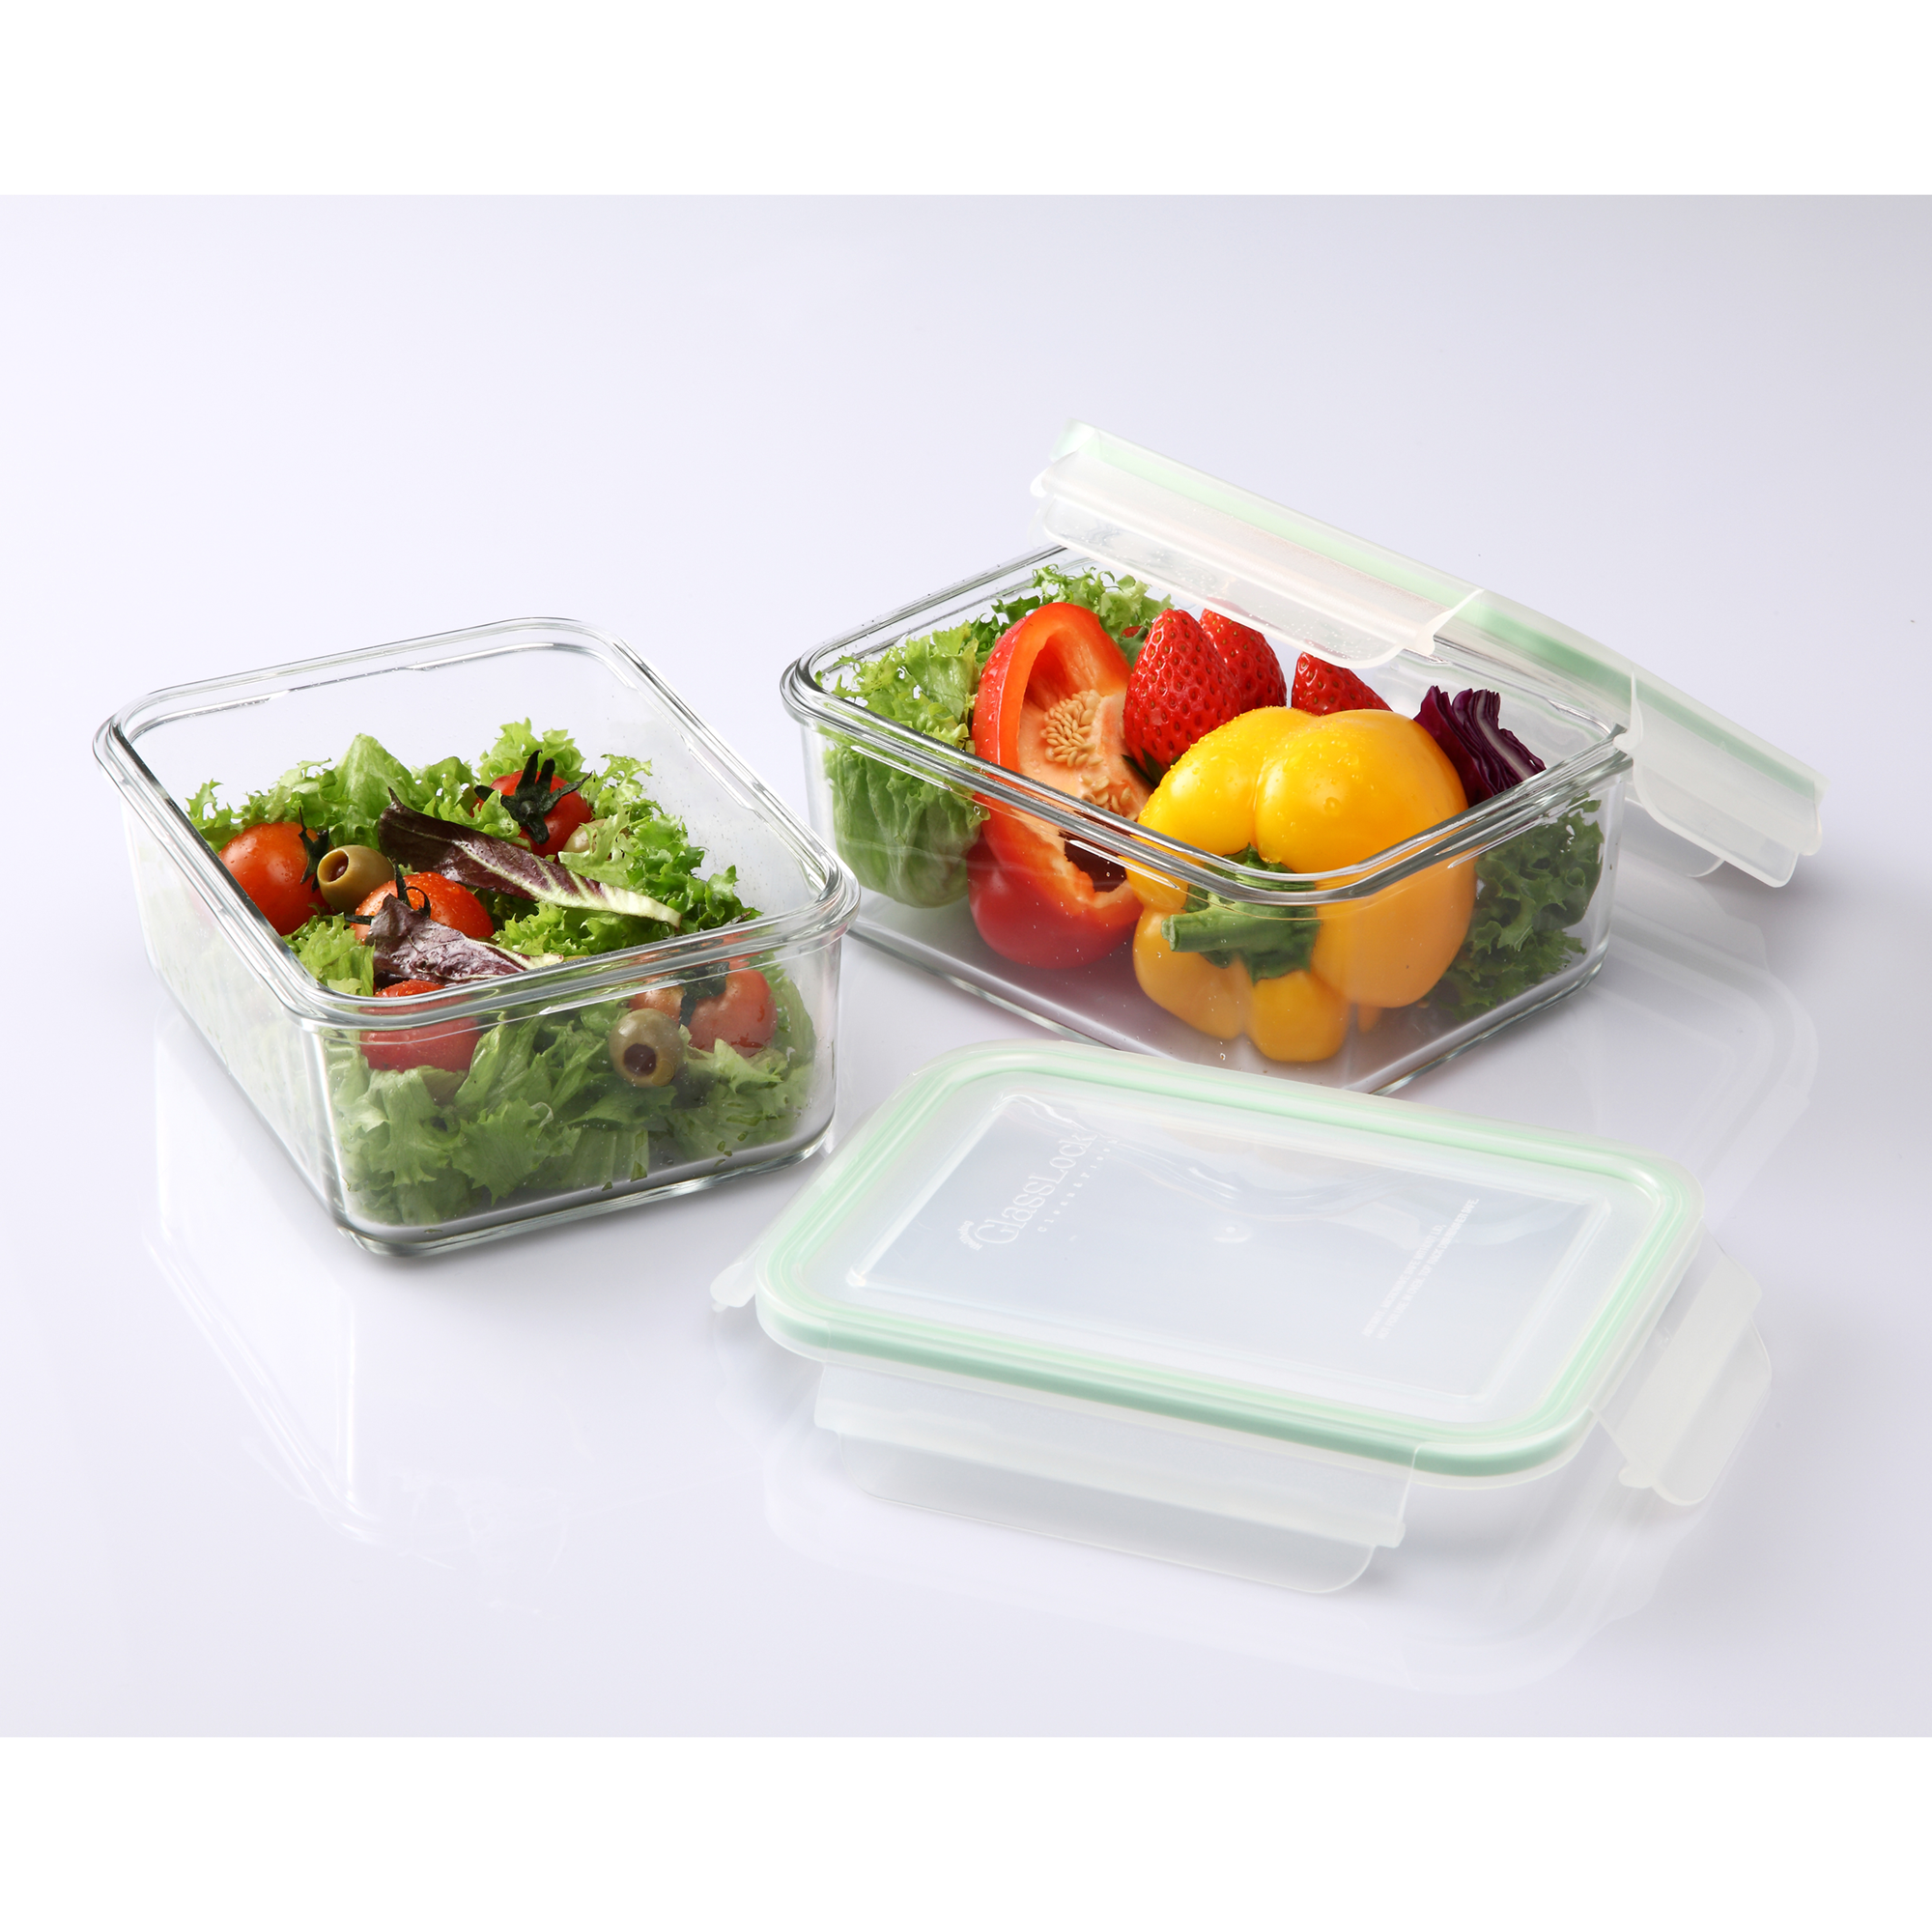 Food storage container, Air Type range, 920 ml, made from glass -  Glasslock